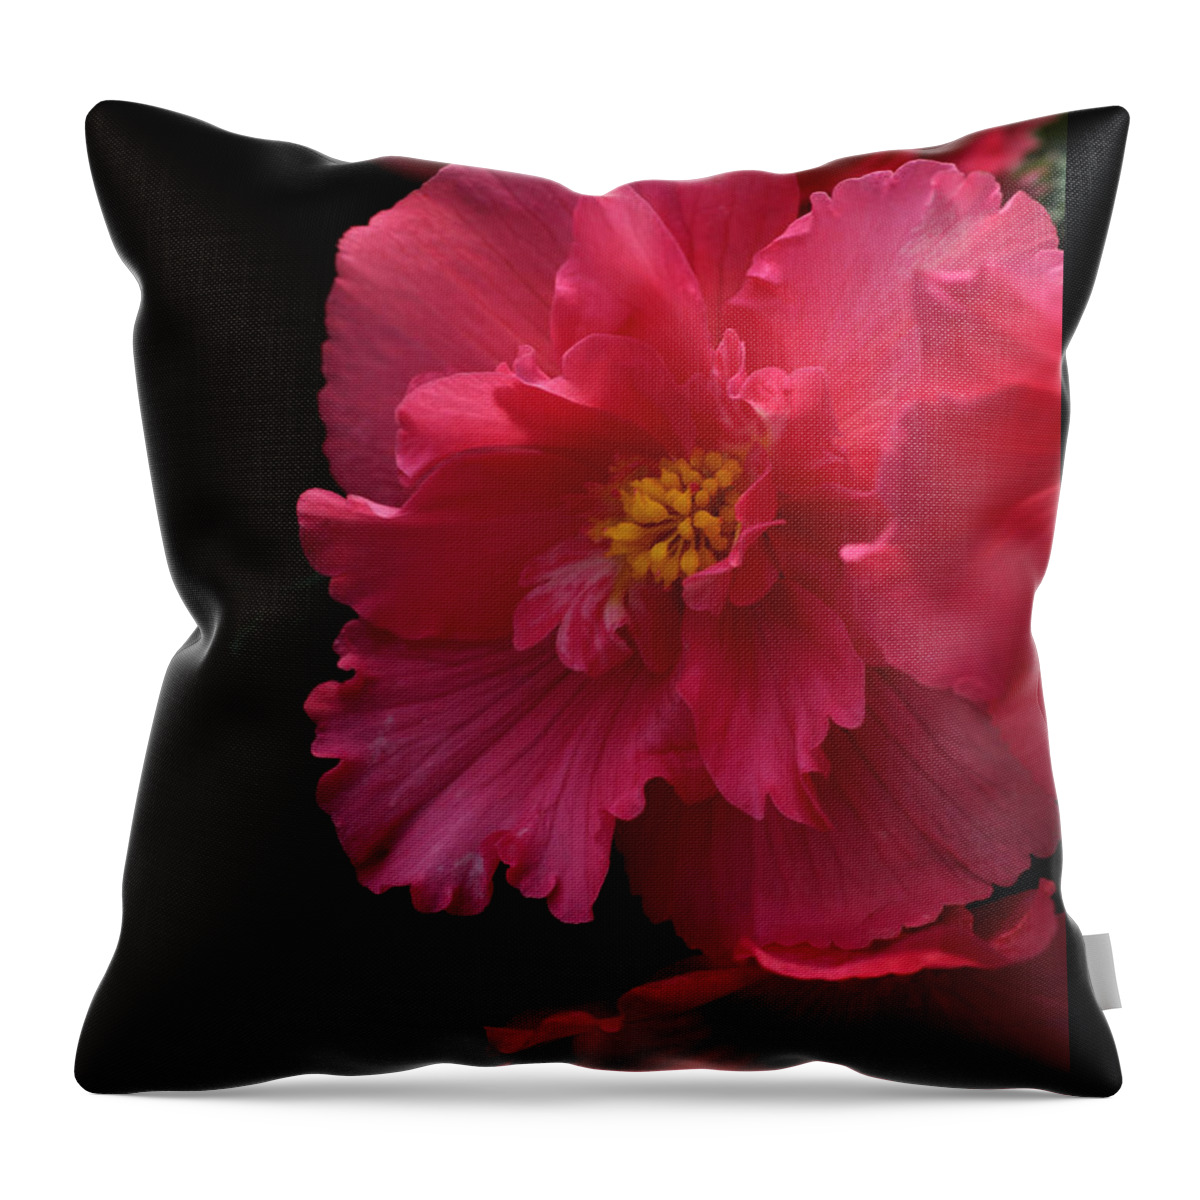 Flower Throw Pillow featuring the photograph Begonia by Tammy Pool